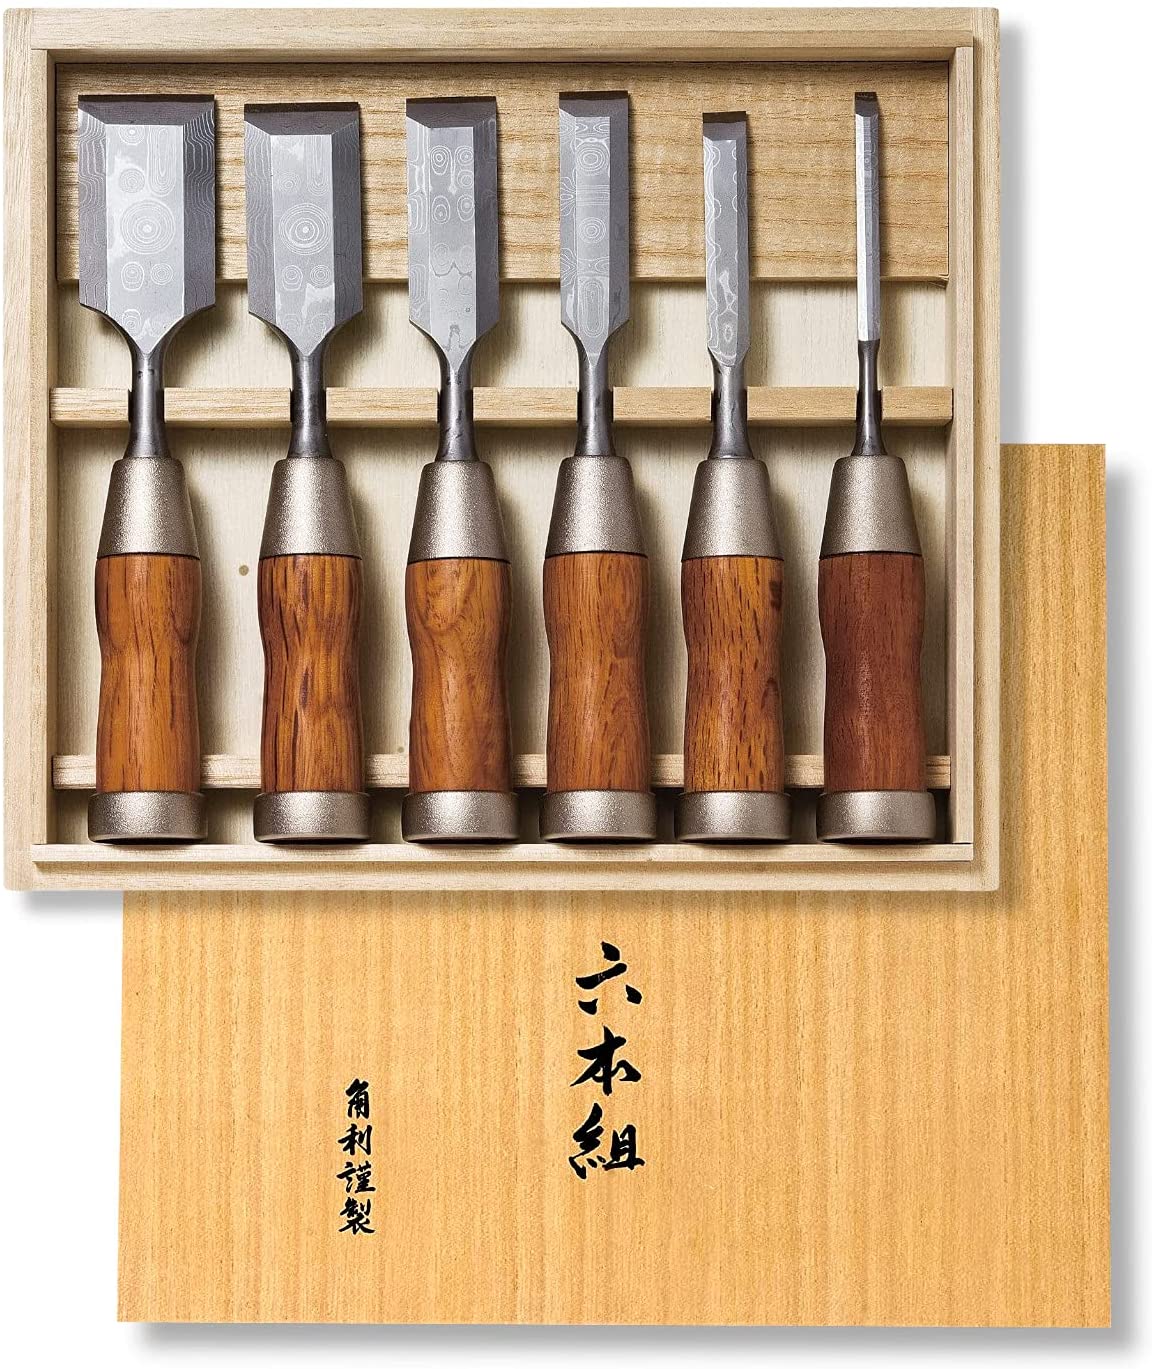 Japanese SK5 Steel Wood Chisels for Woodworking, SELL SEPARATELY, NOT IN SET